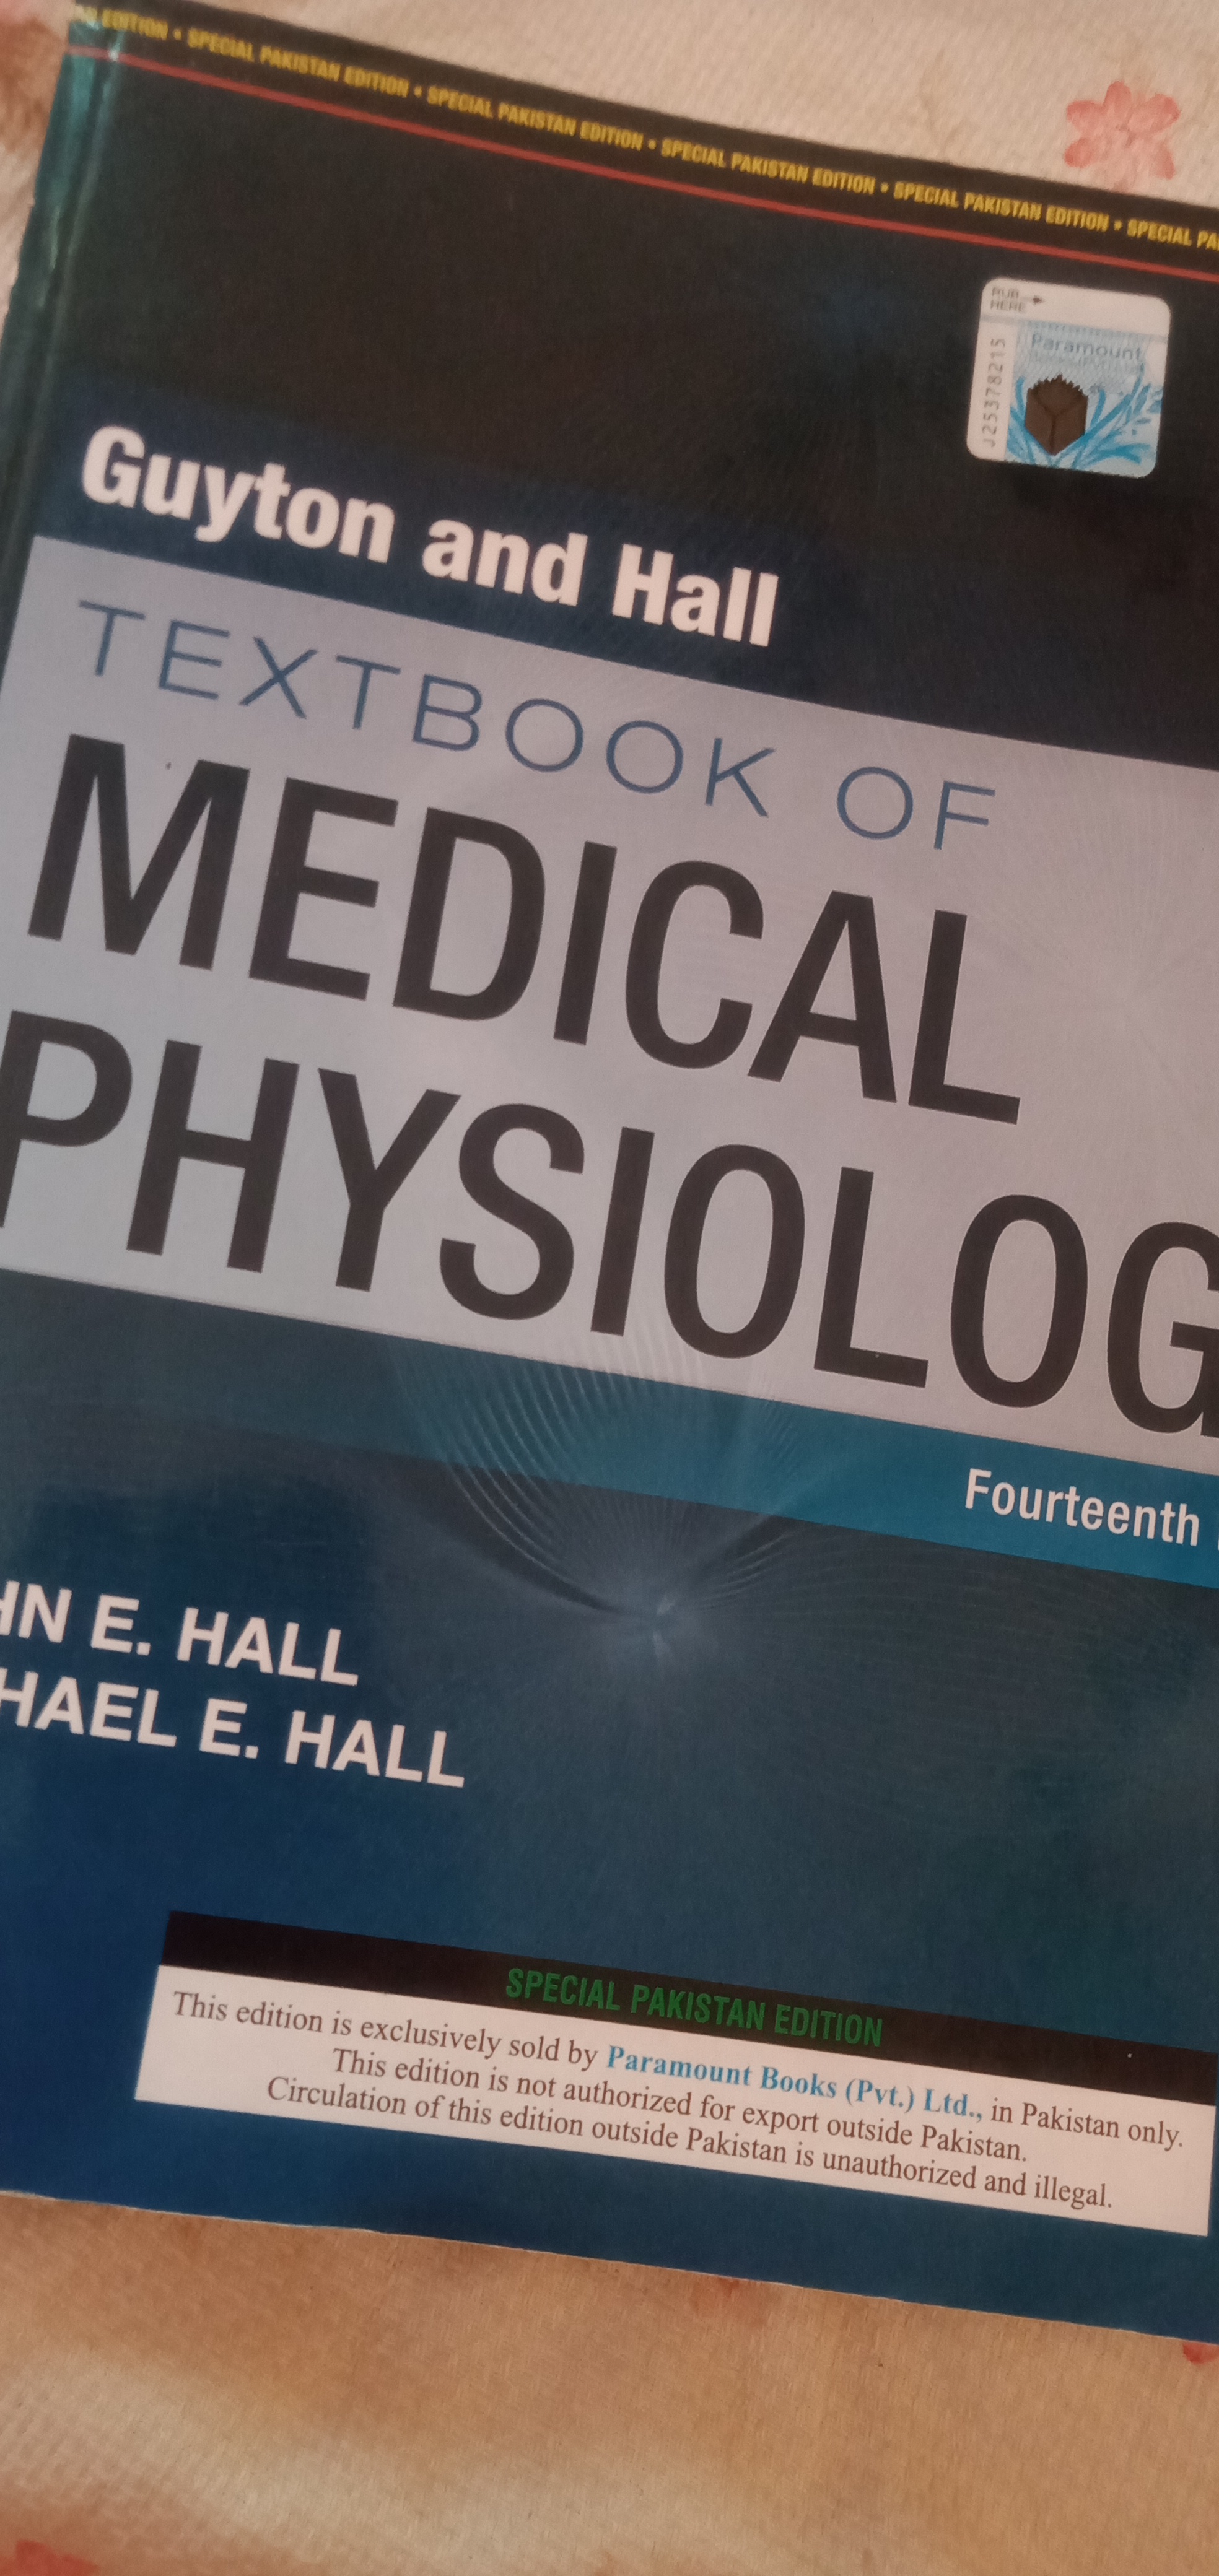 Guyton and Hall book of medical physiology